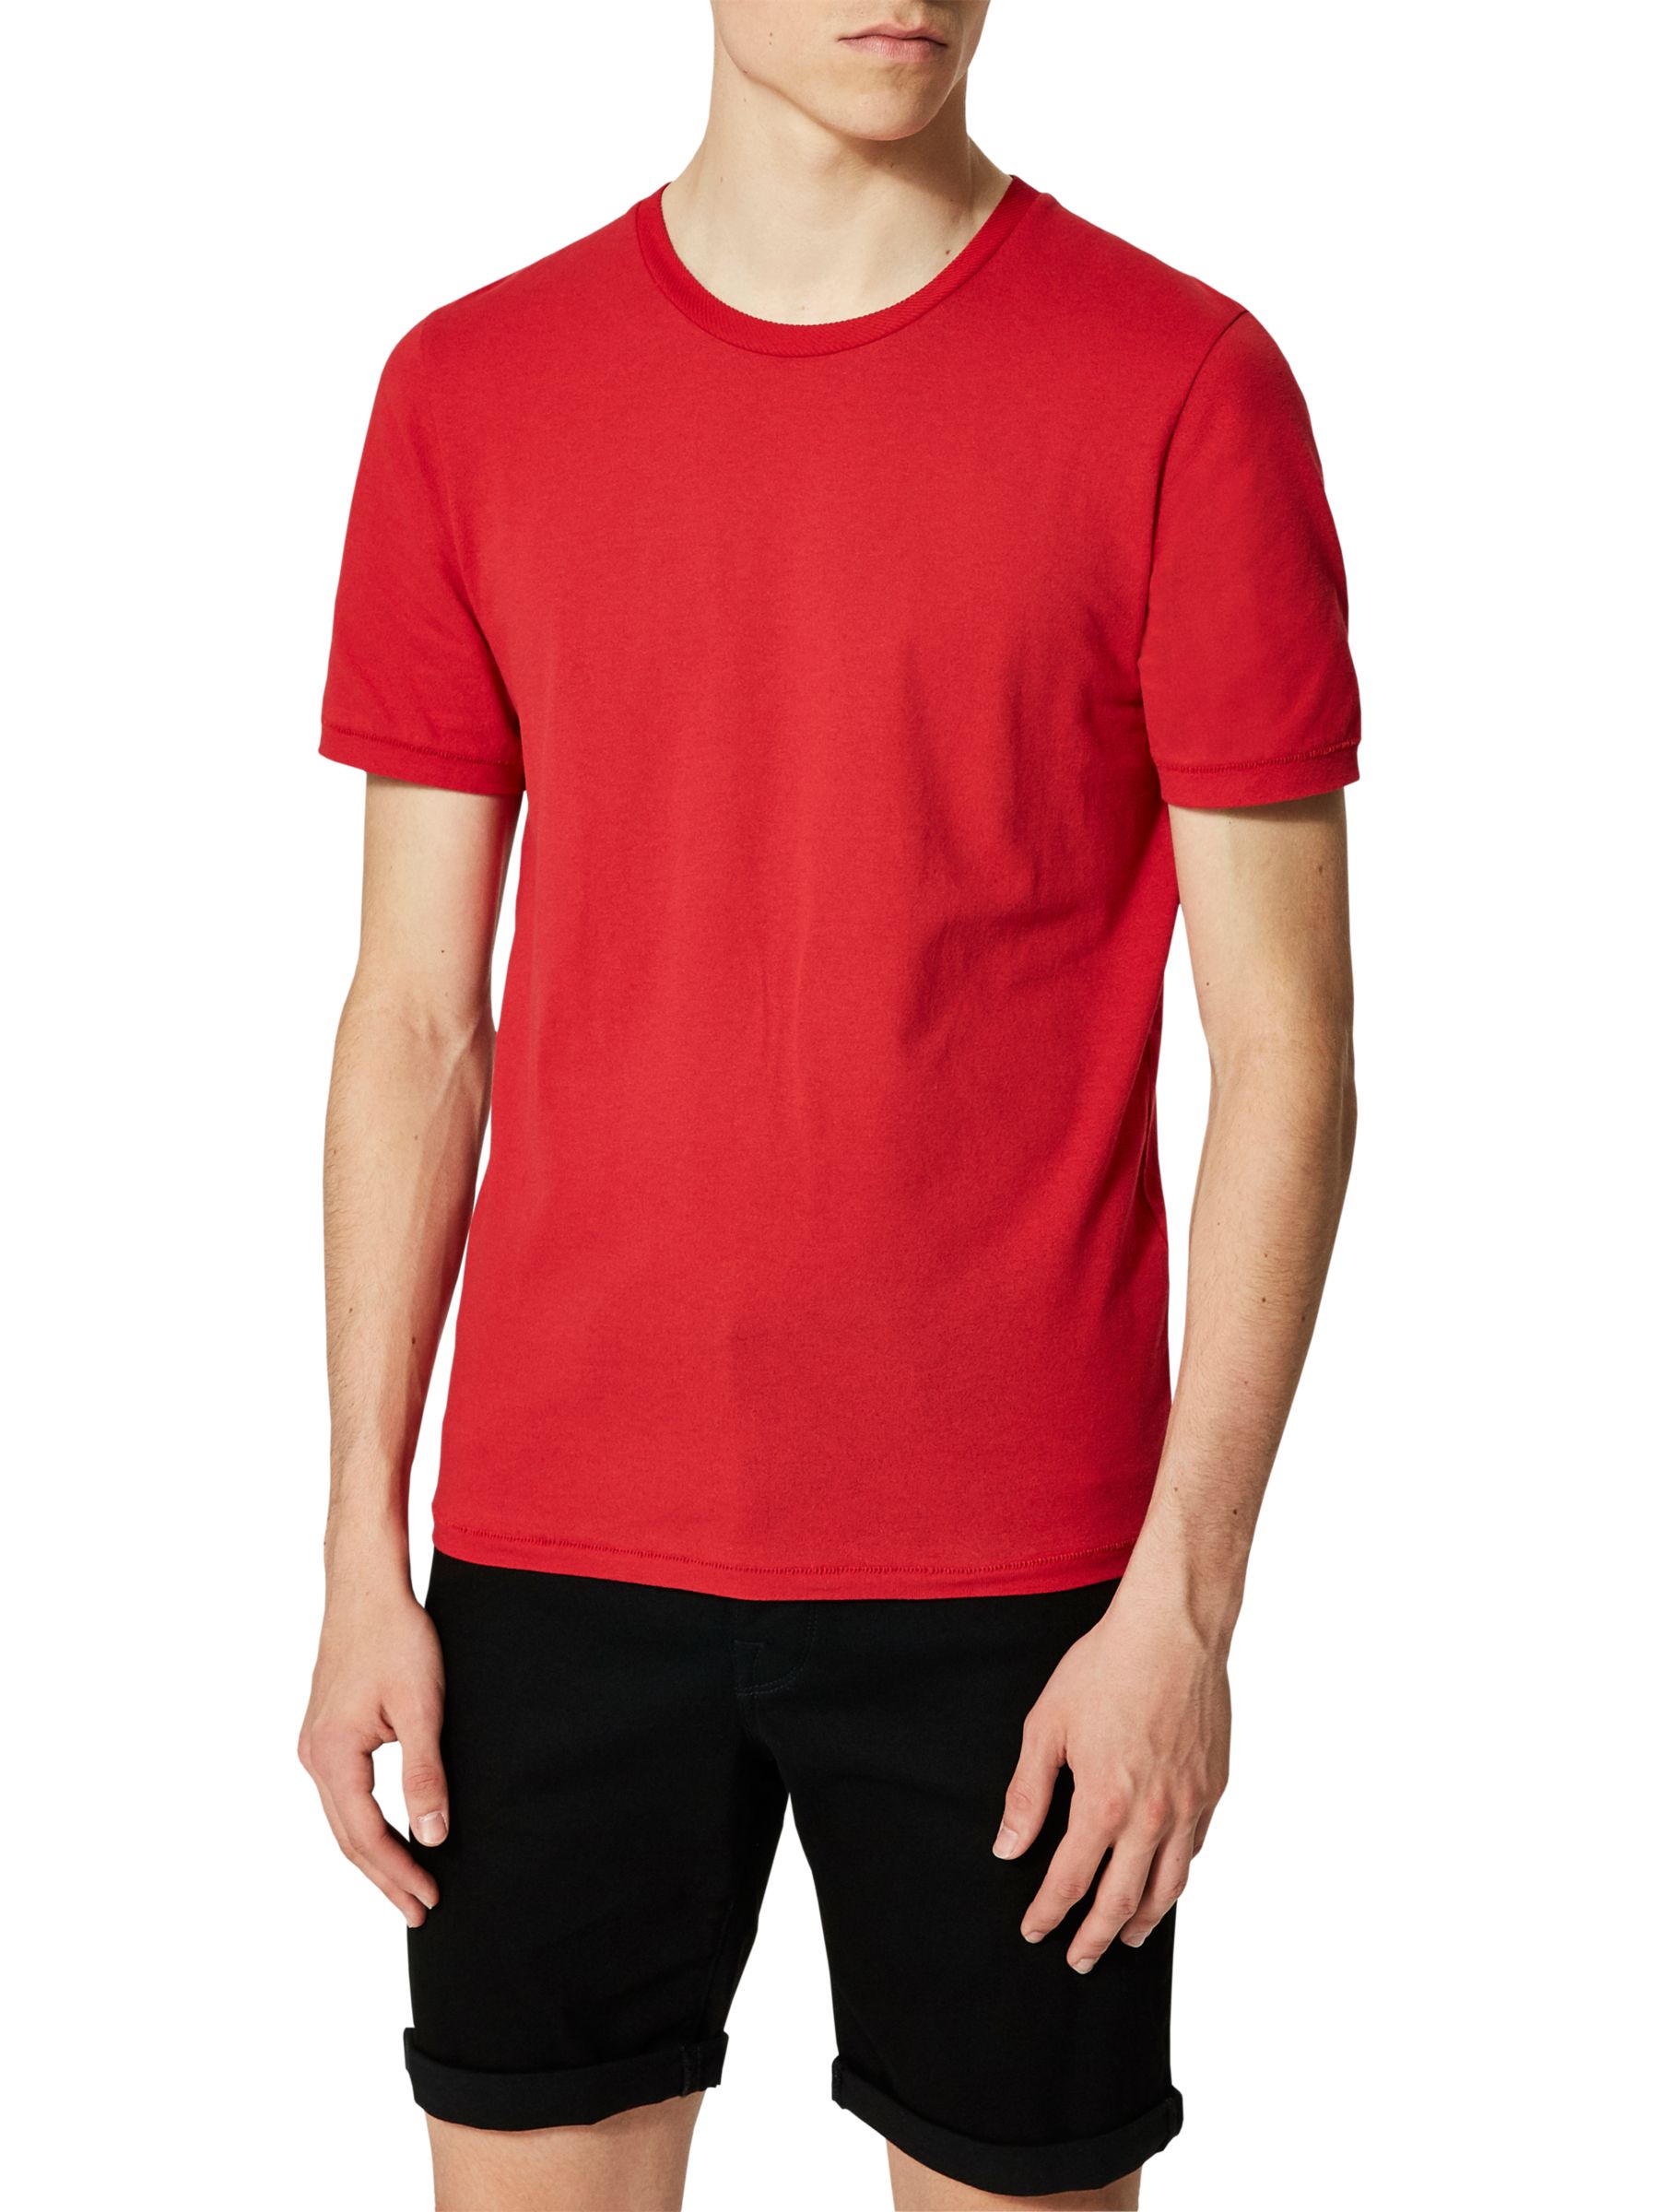 Selected Homme Shore Short Sleeve T-Shirt, Red